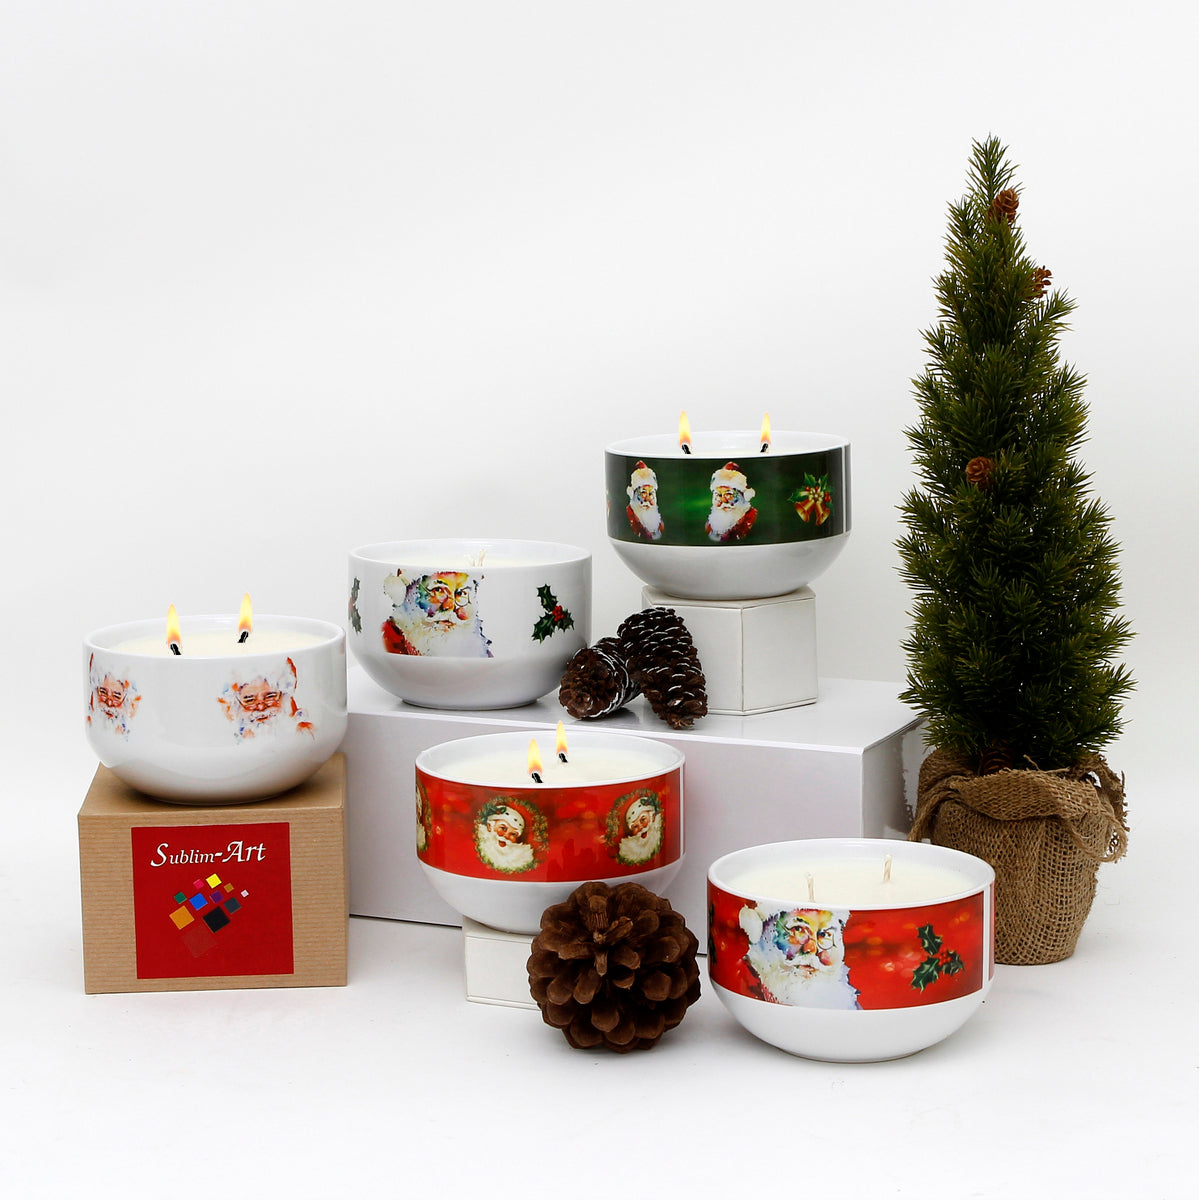 SUBLIMART: Two Wicks Soy Wax Candle in a Porcelain Bowl - Santa Claus (Design #XMS03)